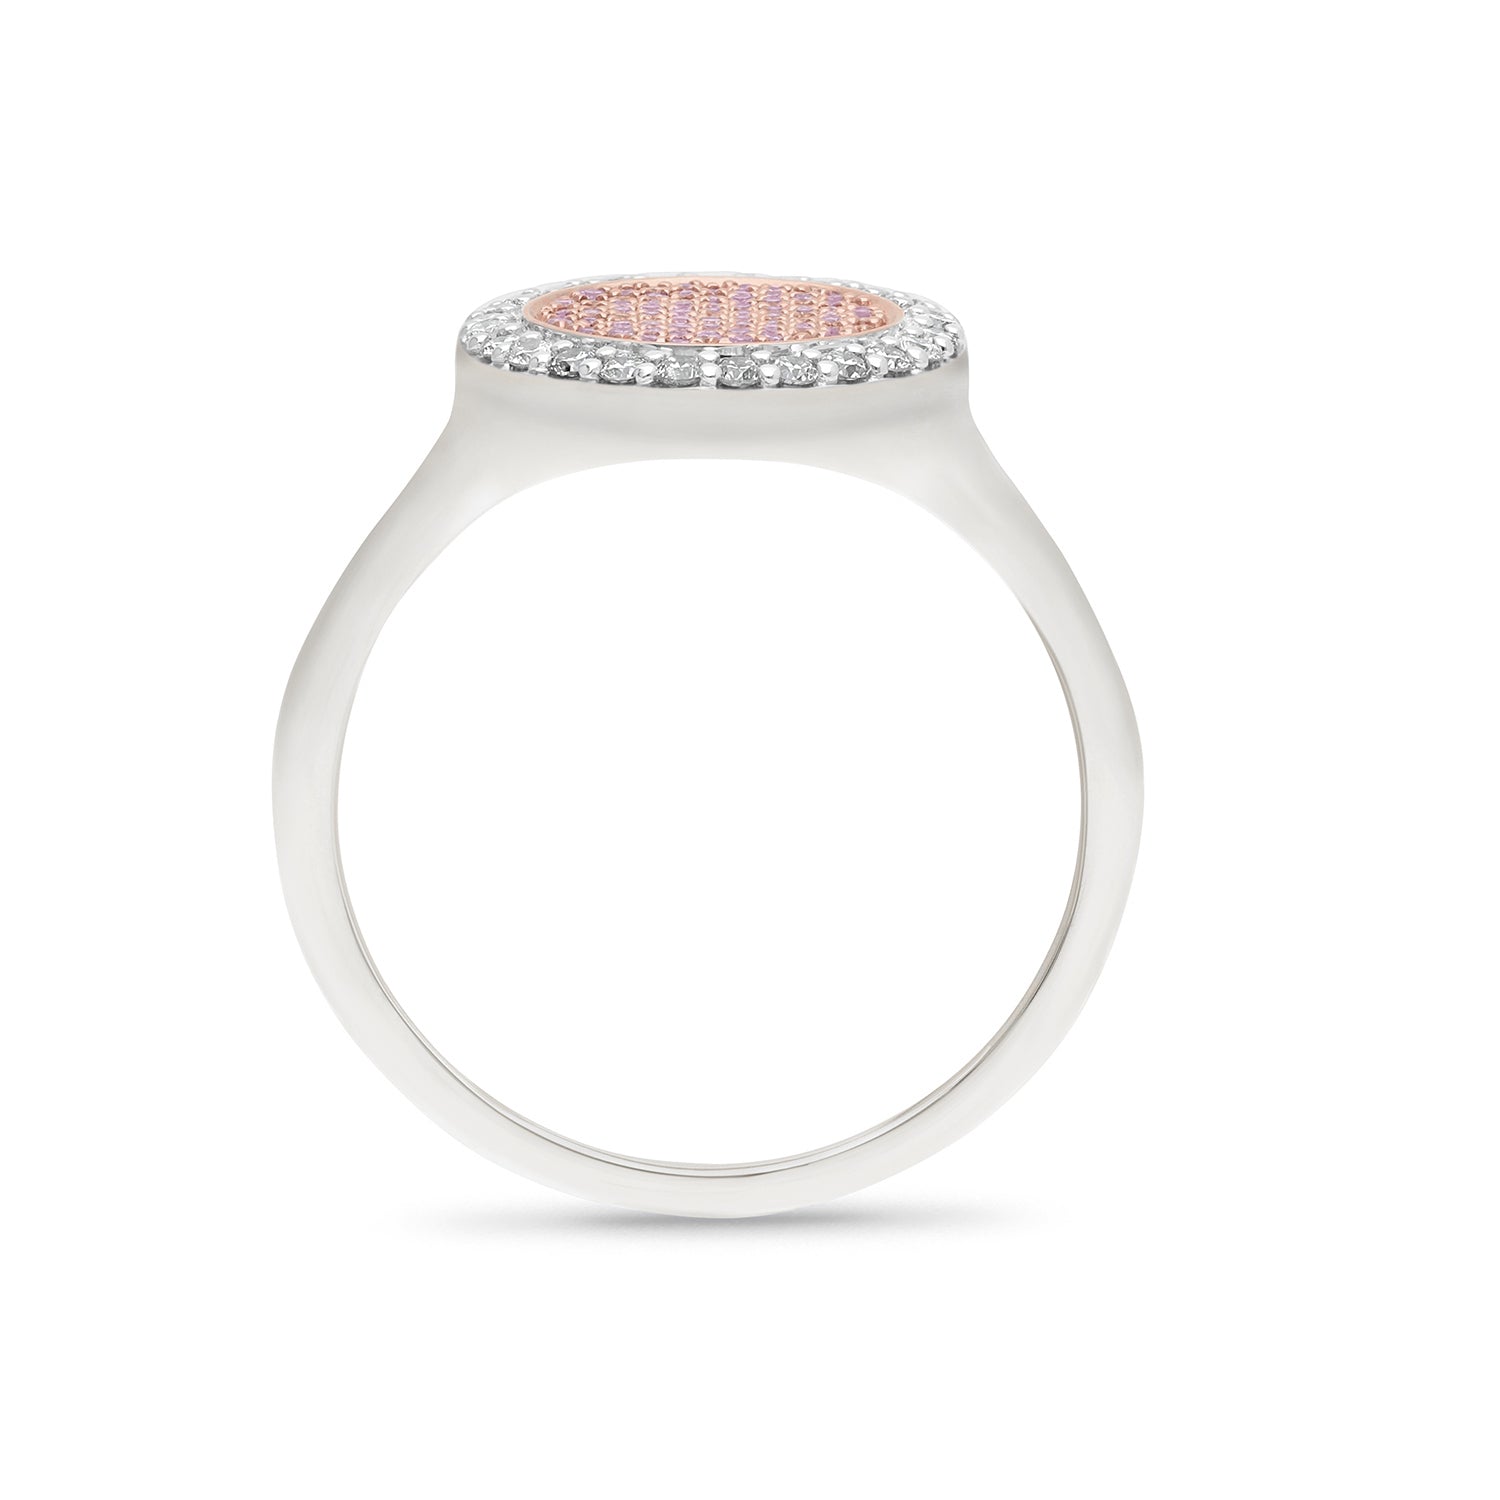 Argyle Pink Caviar Diamonds set in 9ct White, Yellow and Rose Gold, 0.32 carats total.